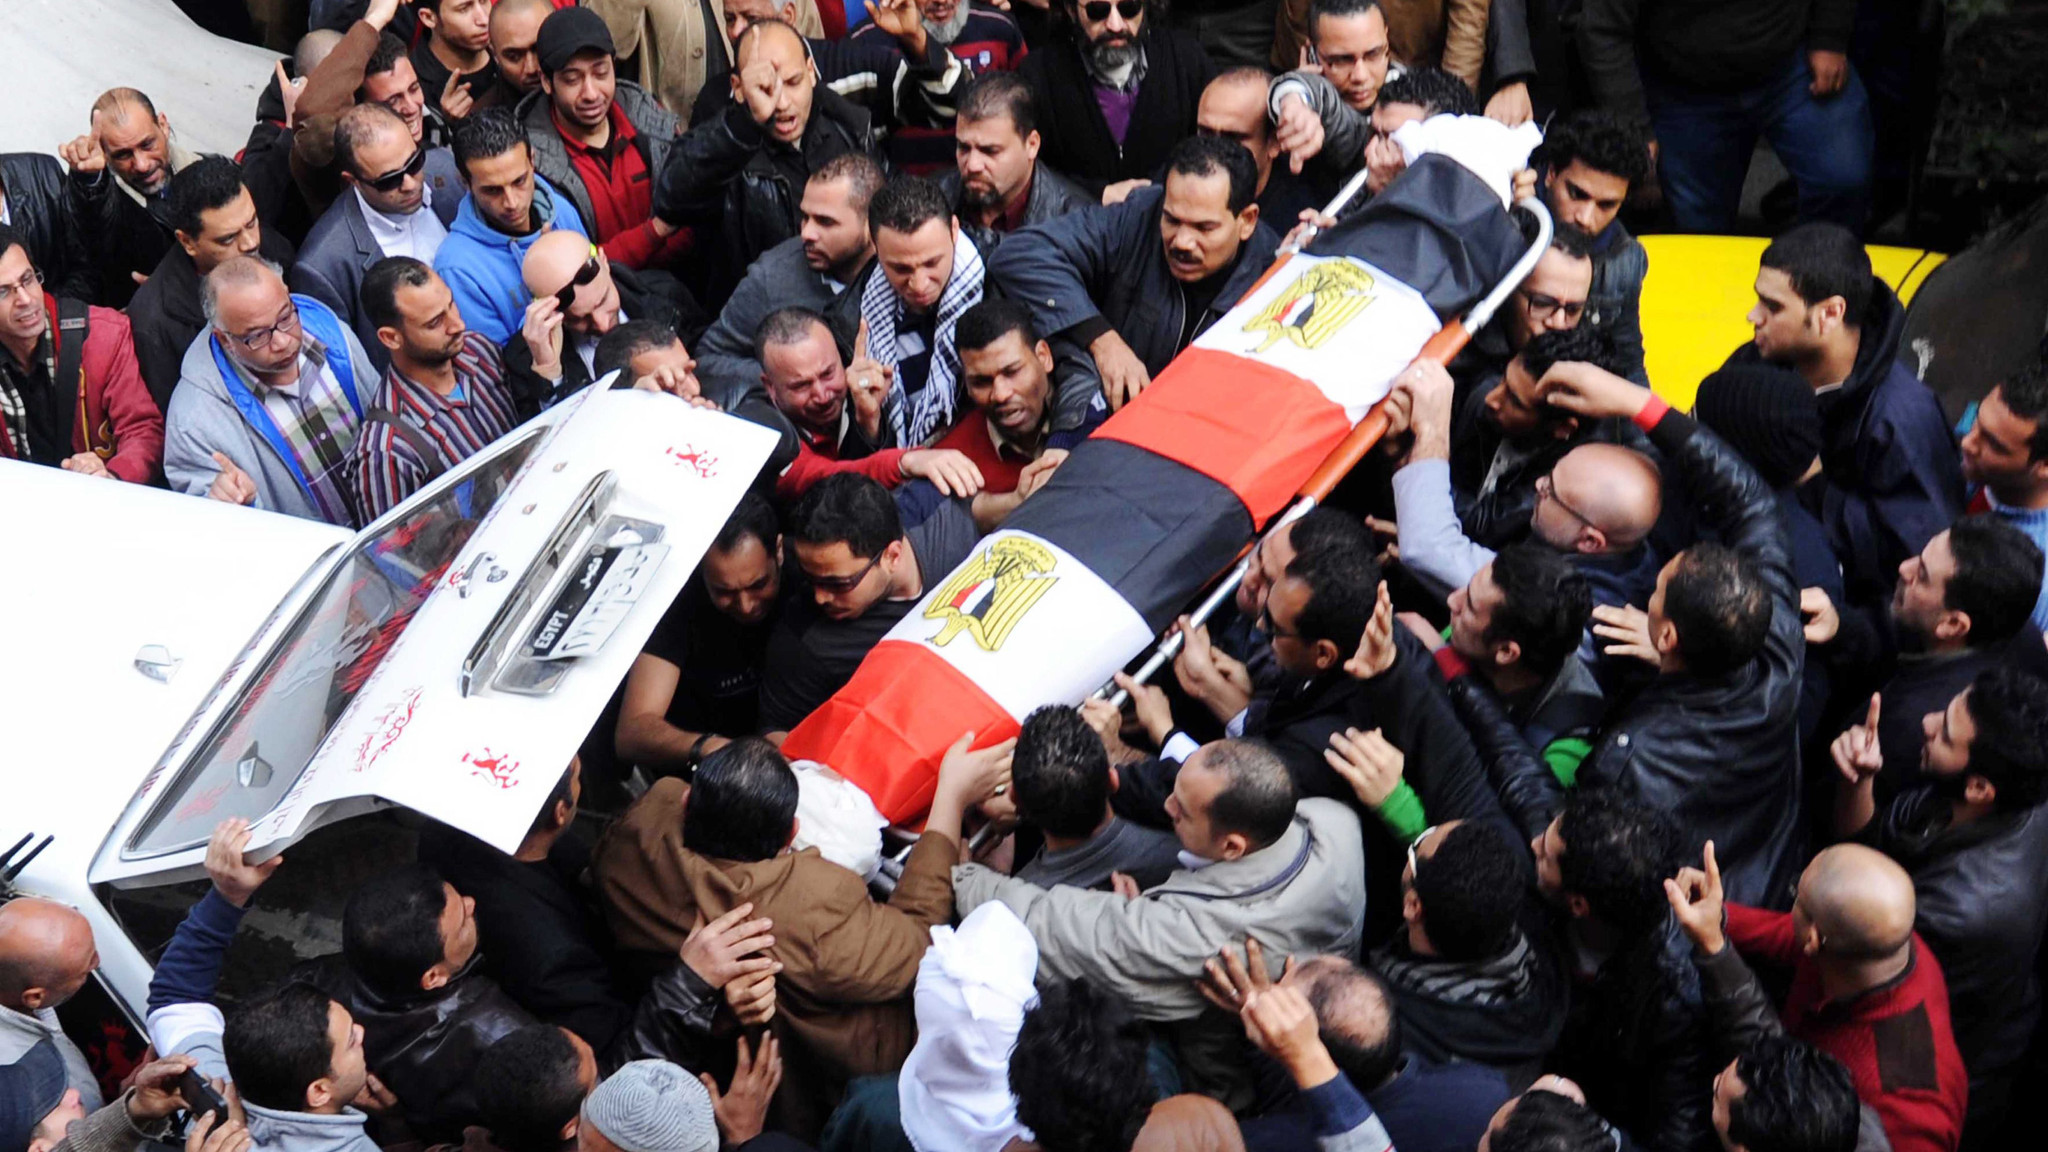 Clashes over Arab Spring anniversary leave 18 dead in Egypt